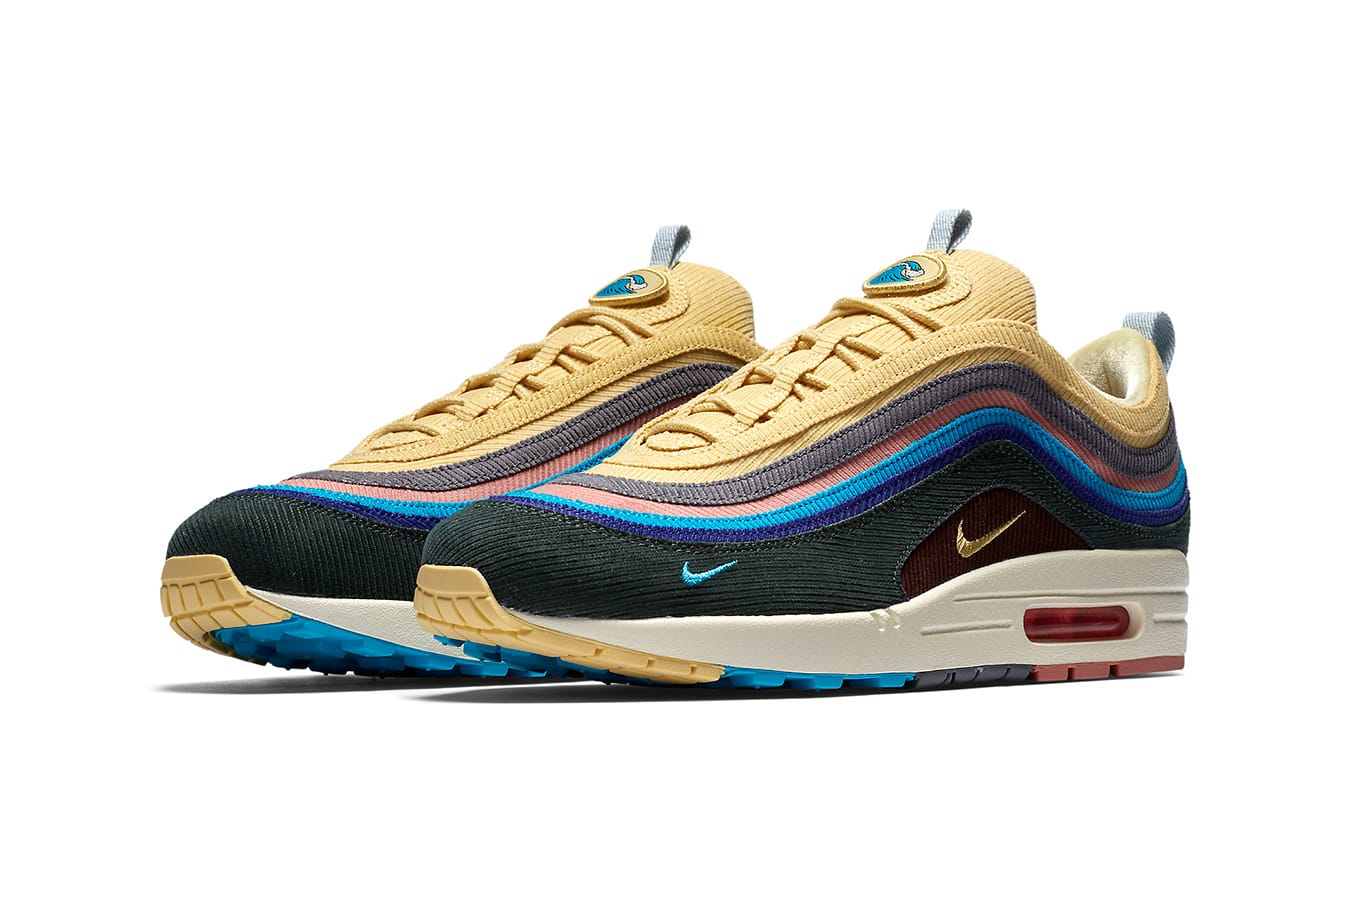 Sean Wotherspoon Nike Air Max 1 97 Restock Info Corduroy SNKRS